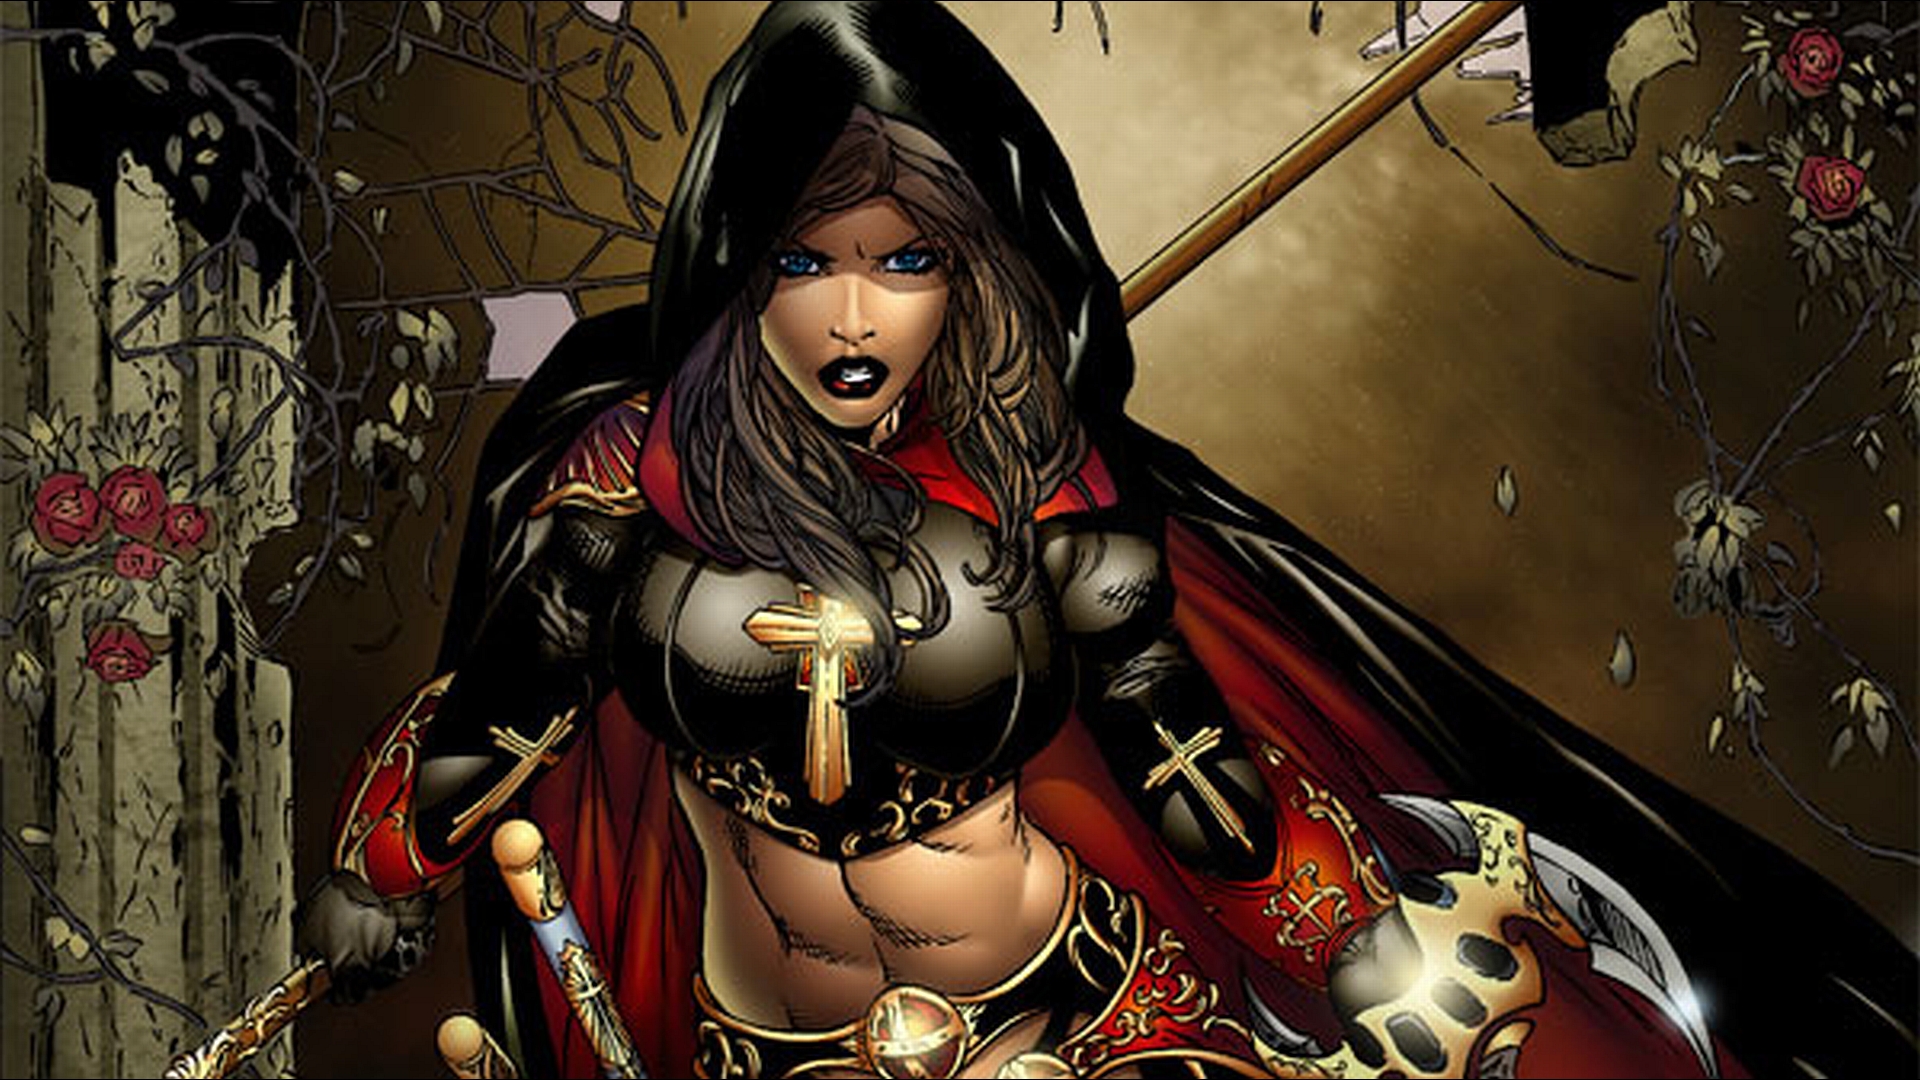 Magdalena, a powerful comic heroine, adorned in her iconic regalia, emanates strength and grace.